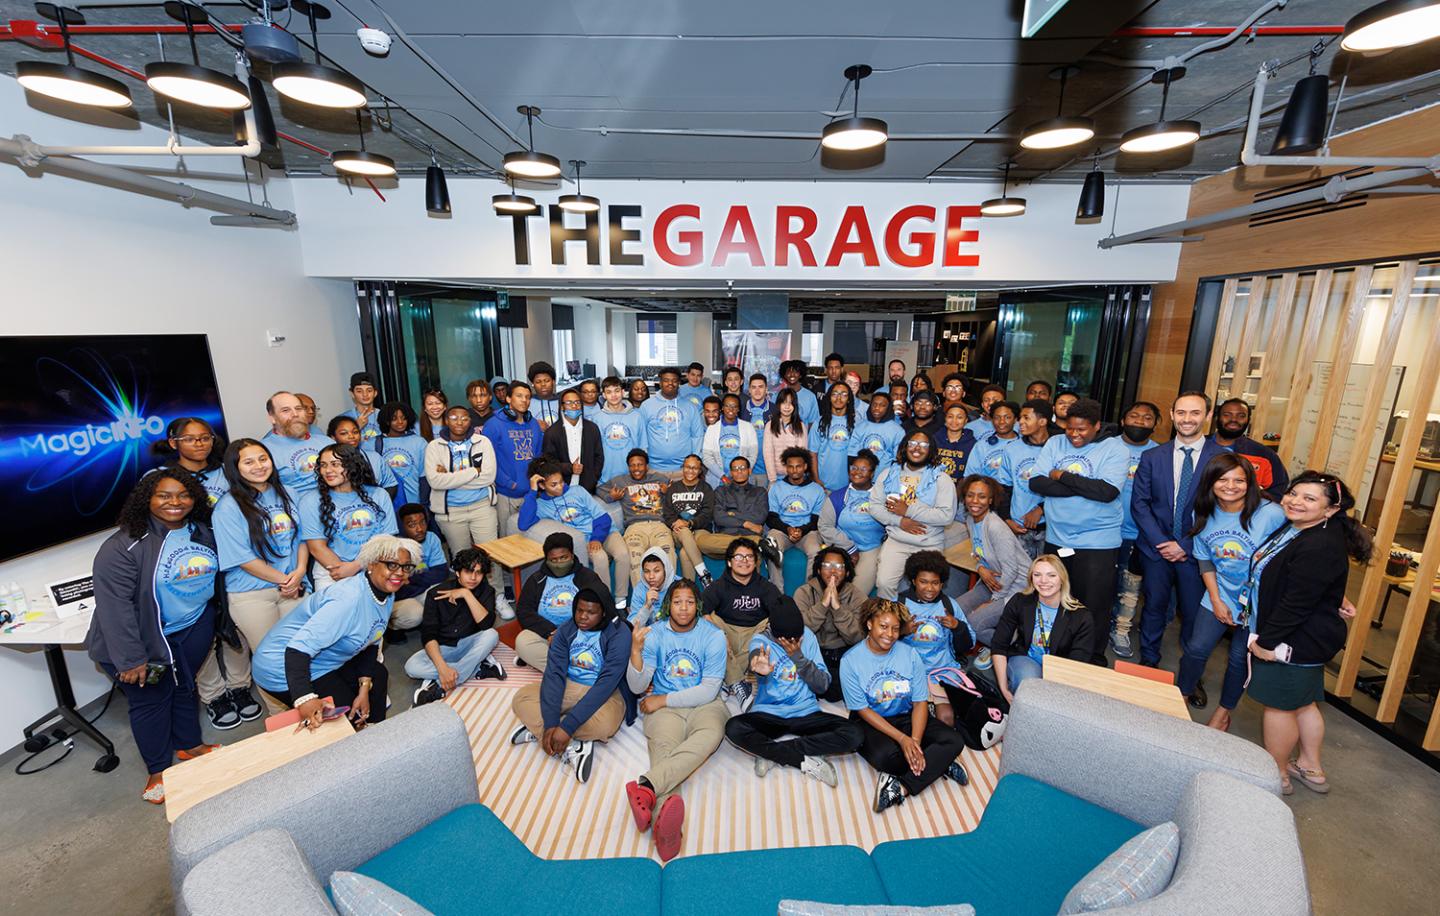 A large group, most wearing light blue t-shirts, poses for a photo on a large sign that reads 'The Garage'